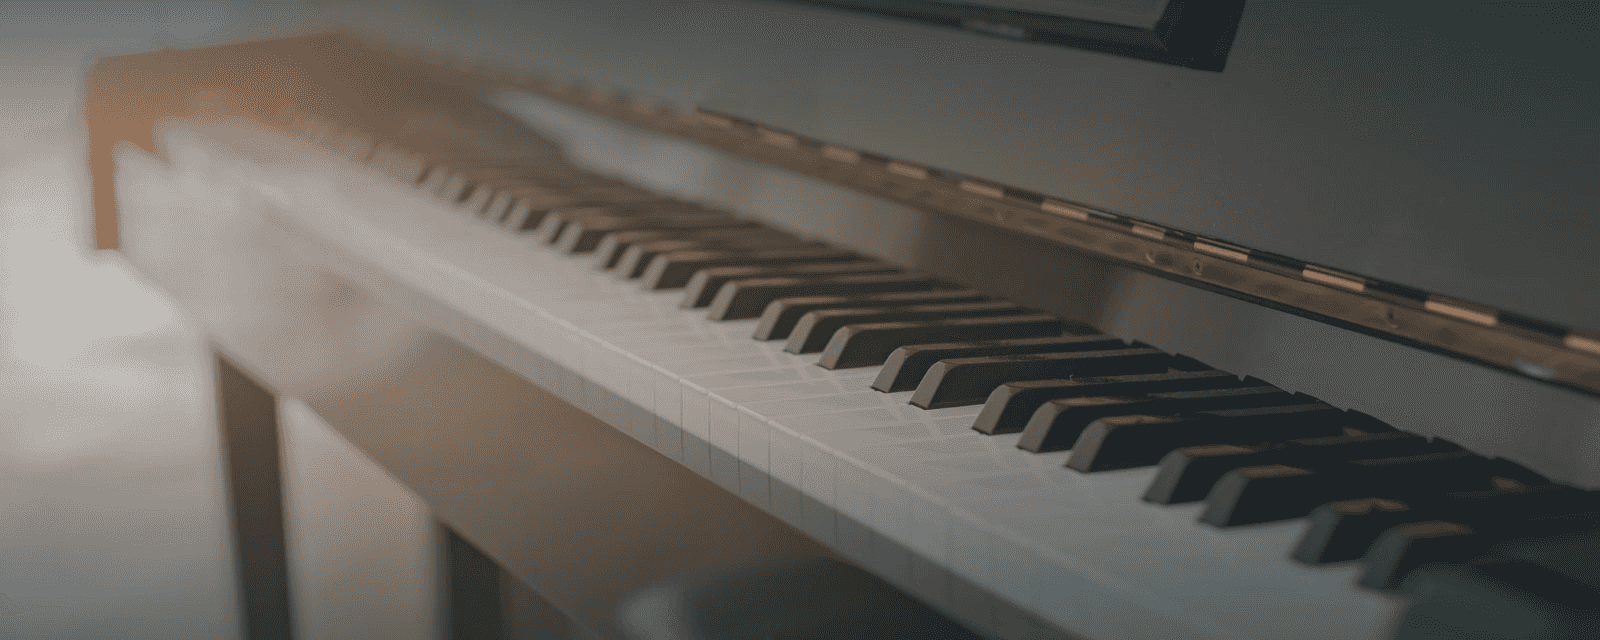 Piano/Keyboard Lessons (Online)